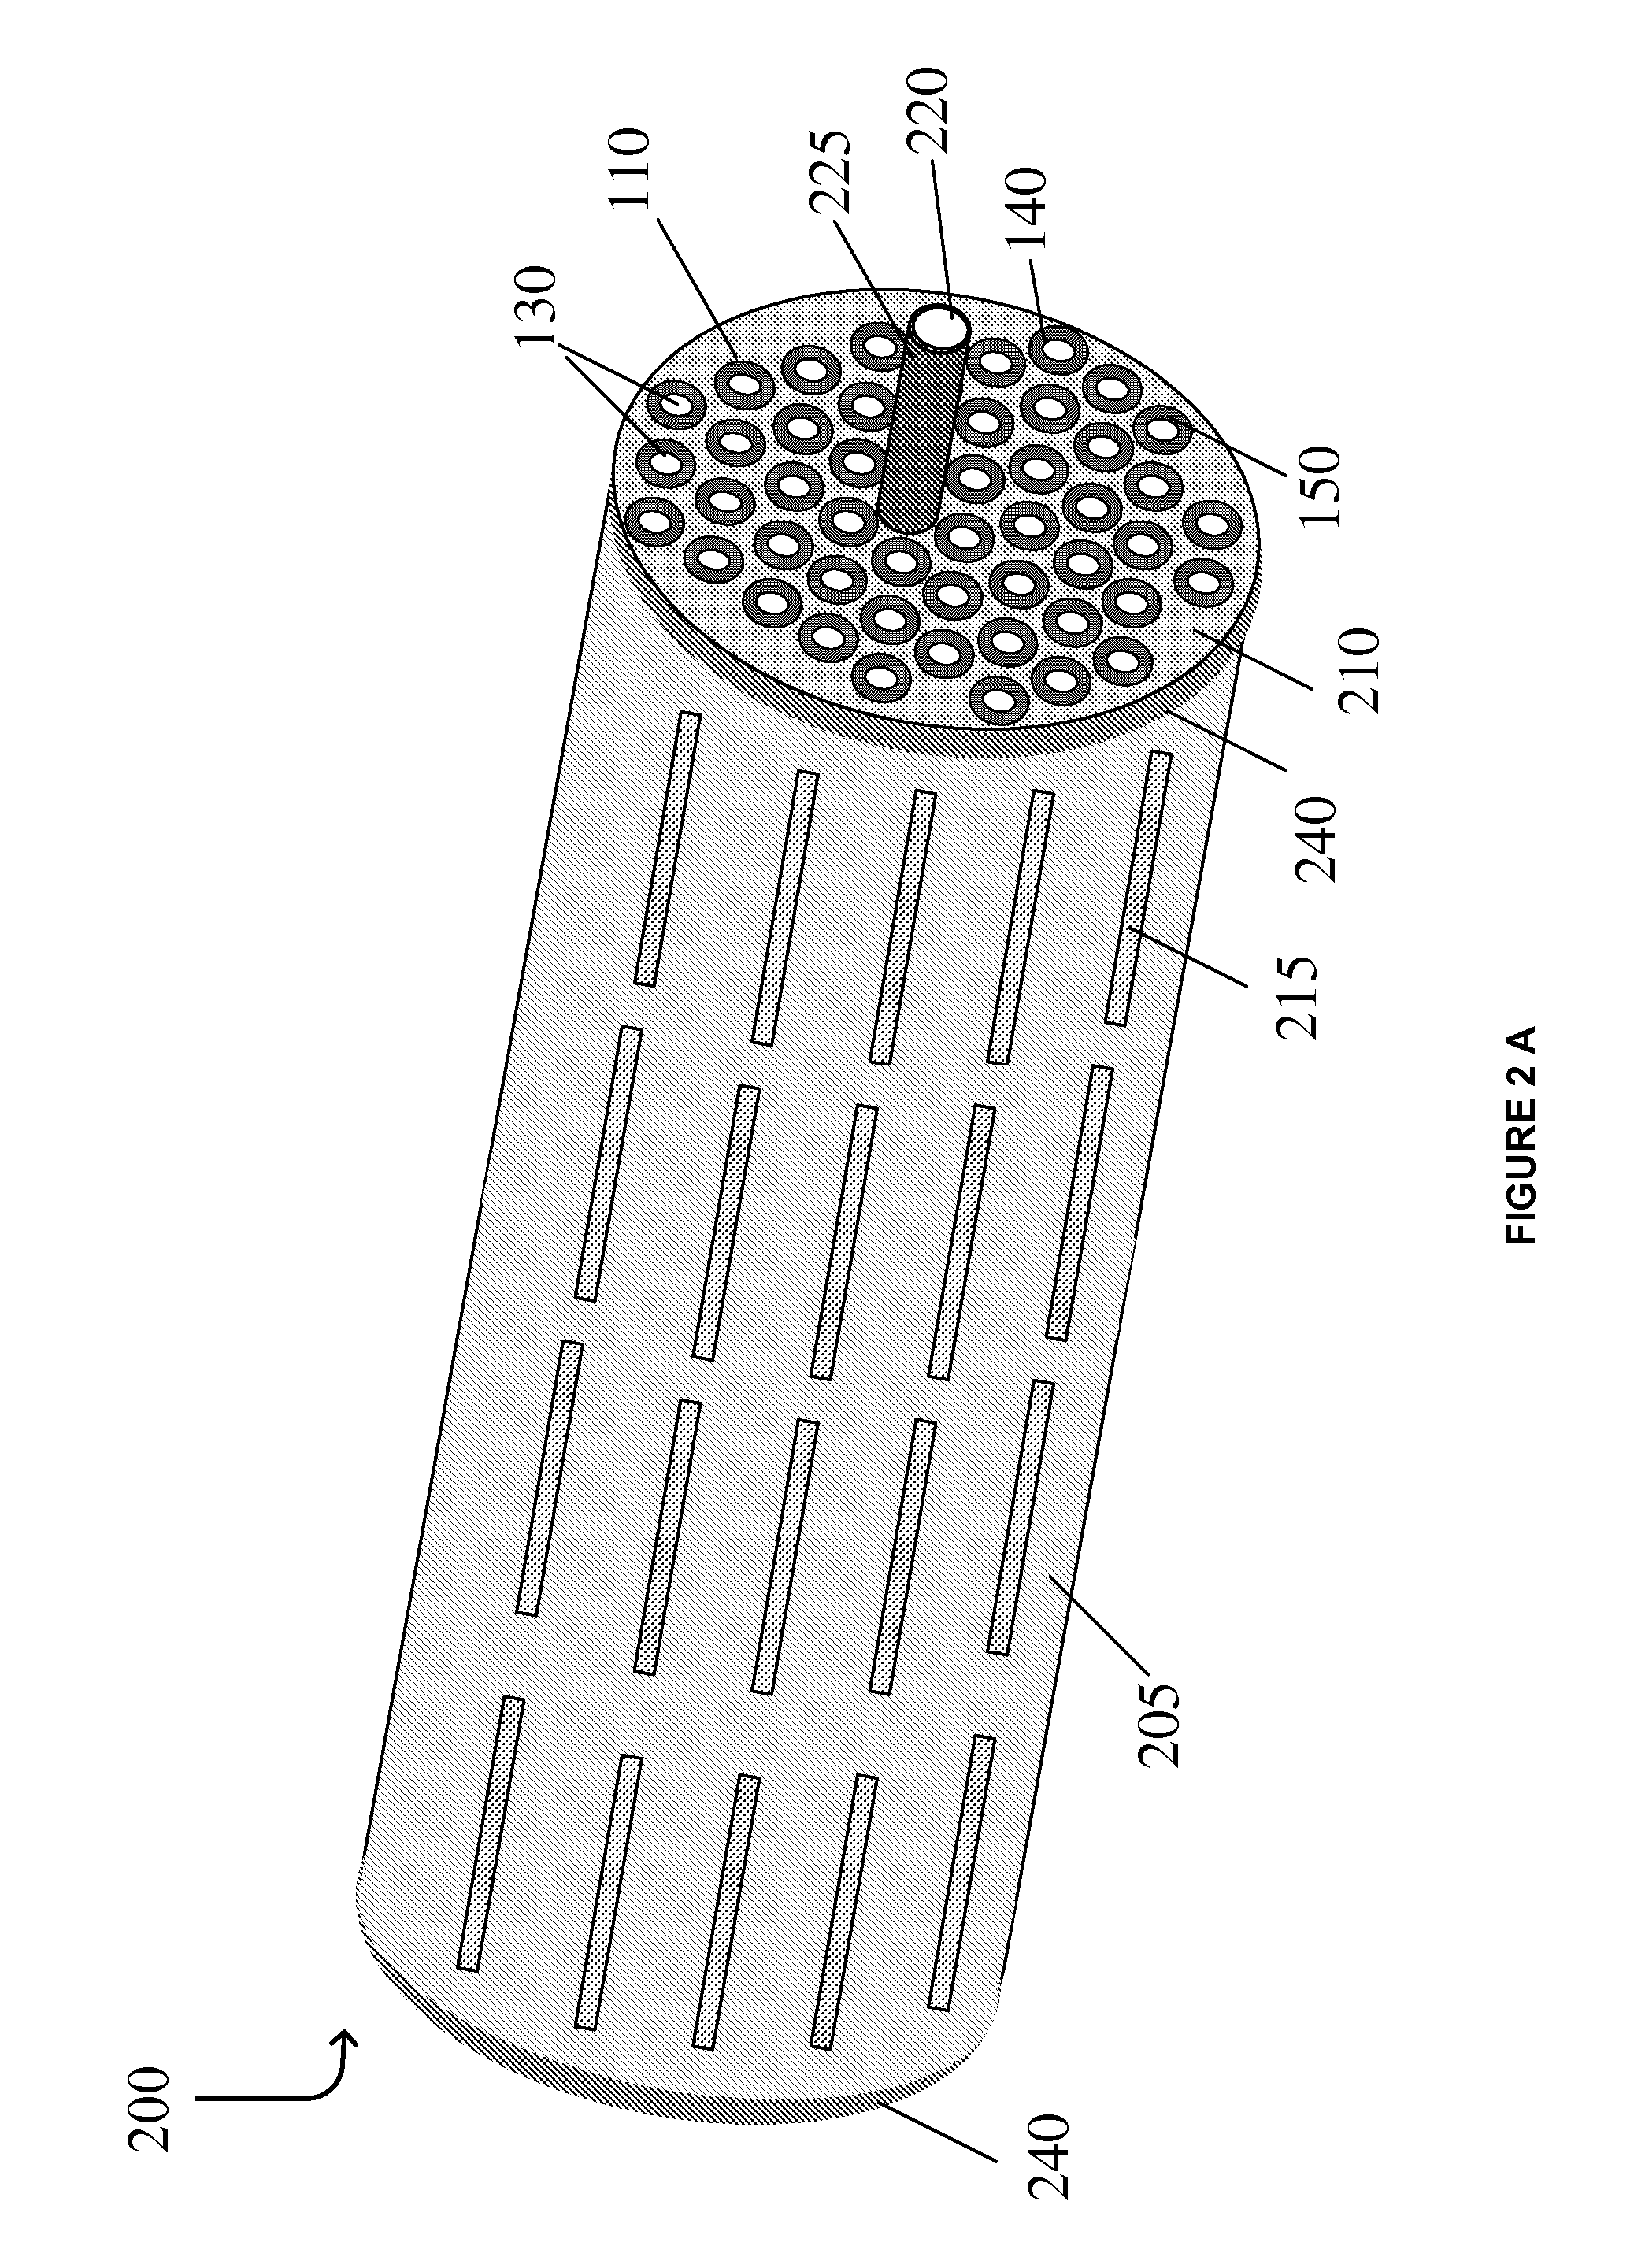 Sorbent fiber compositions and methods of temperature swing adsorption